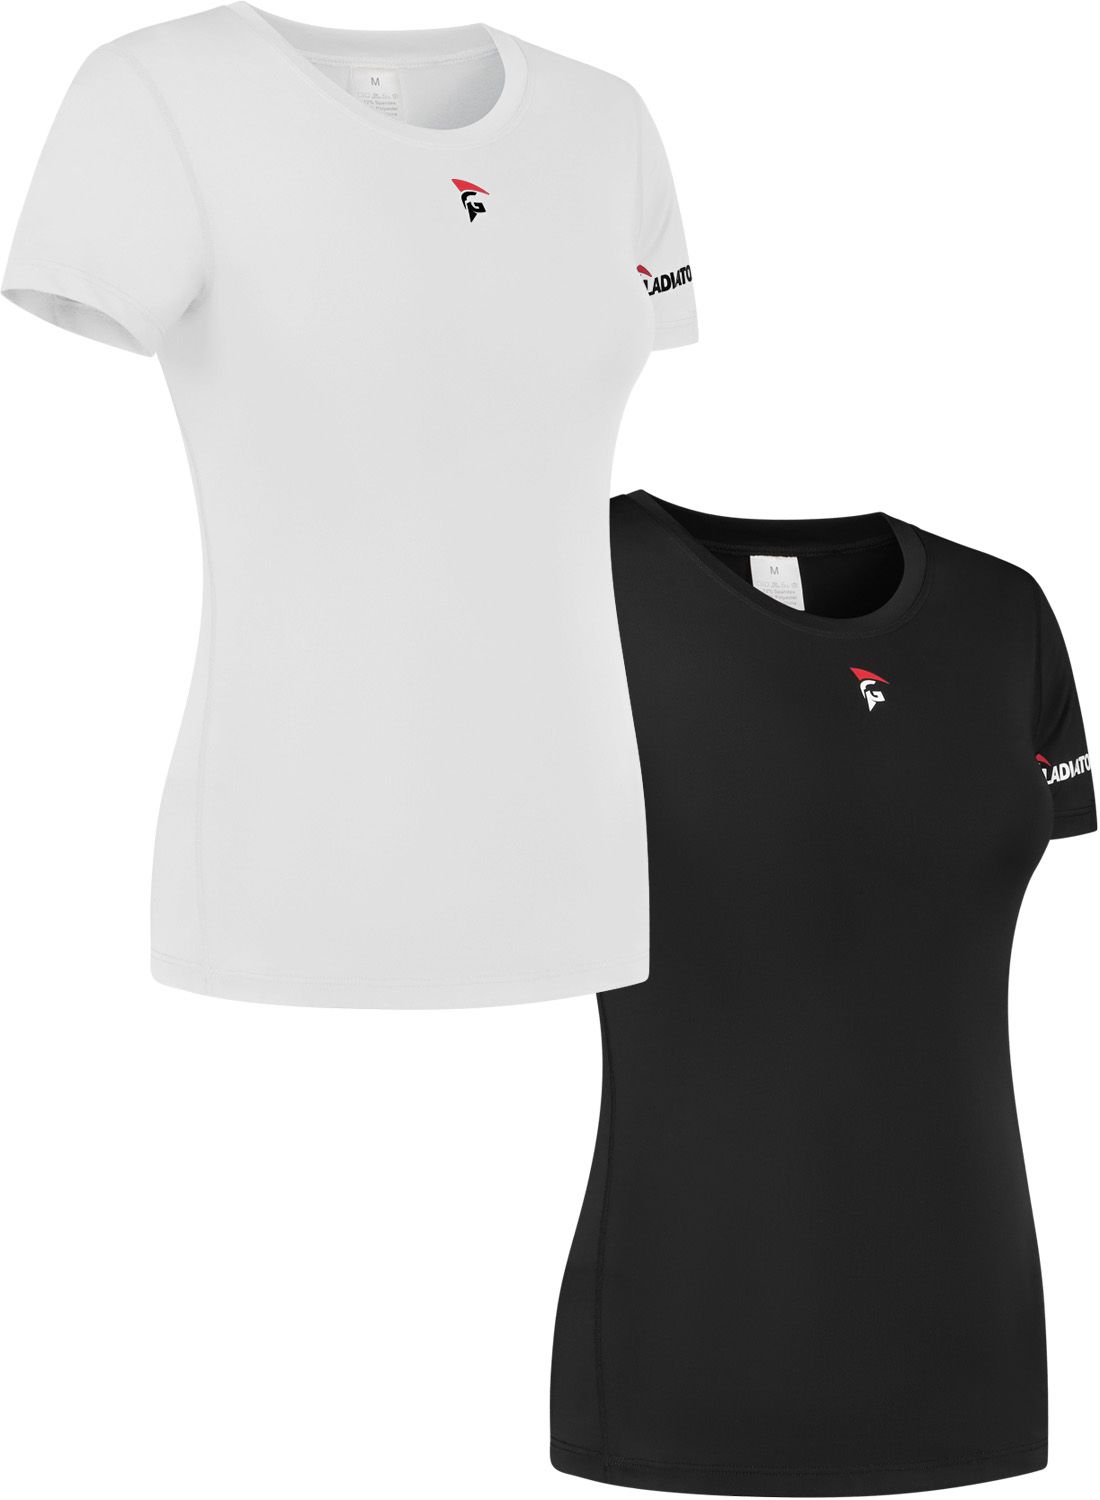 gladiator sports compression shirt for women in black and white for sale